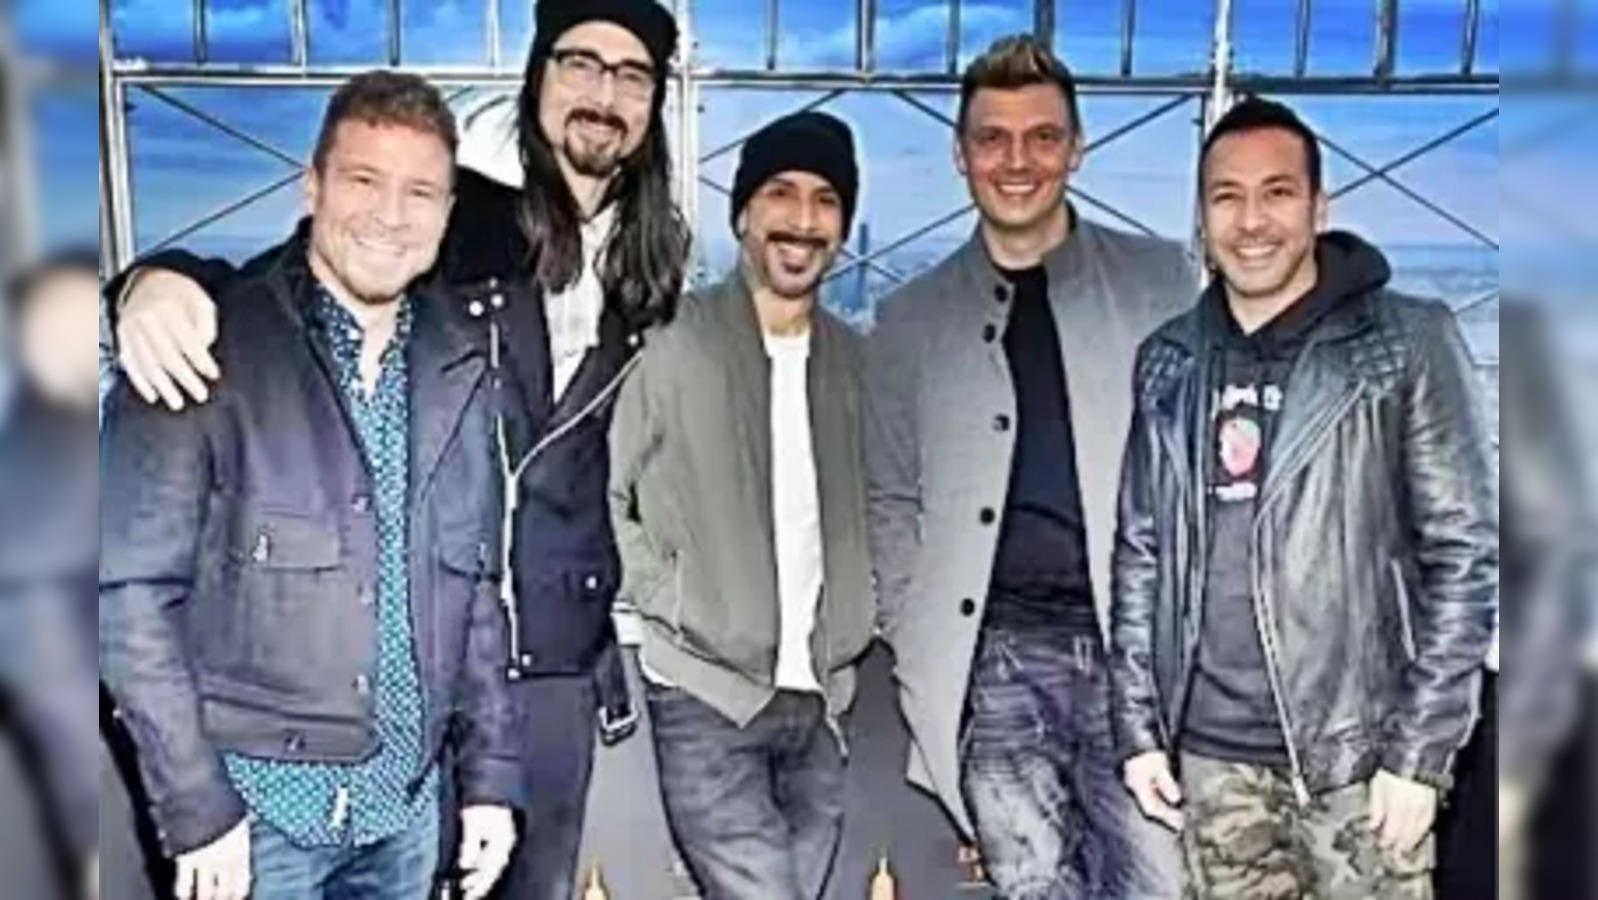 The Backstreet Boys are returning to India—here's the when and